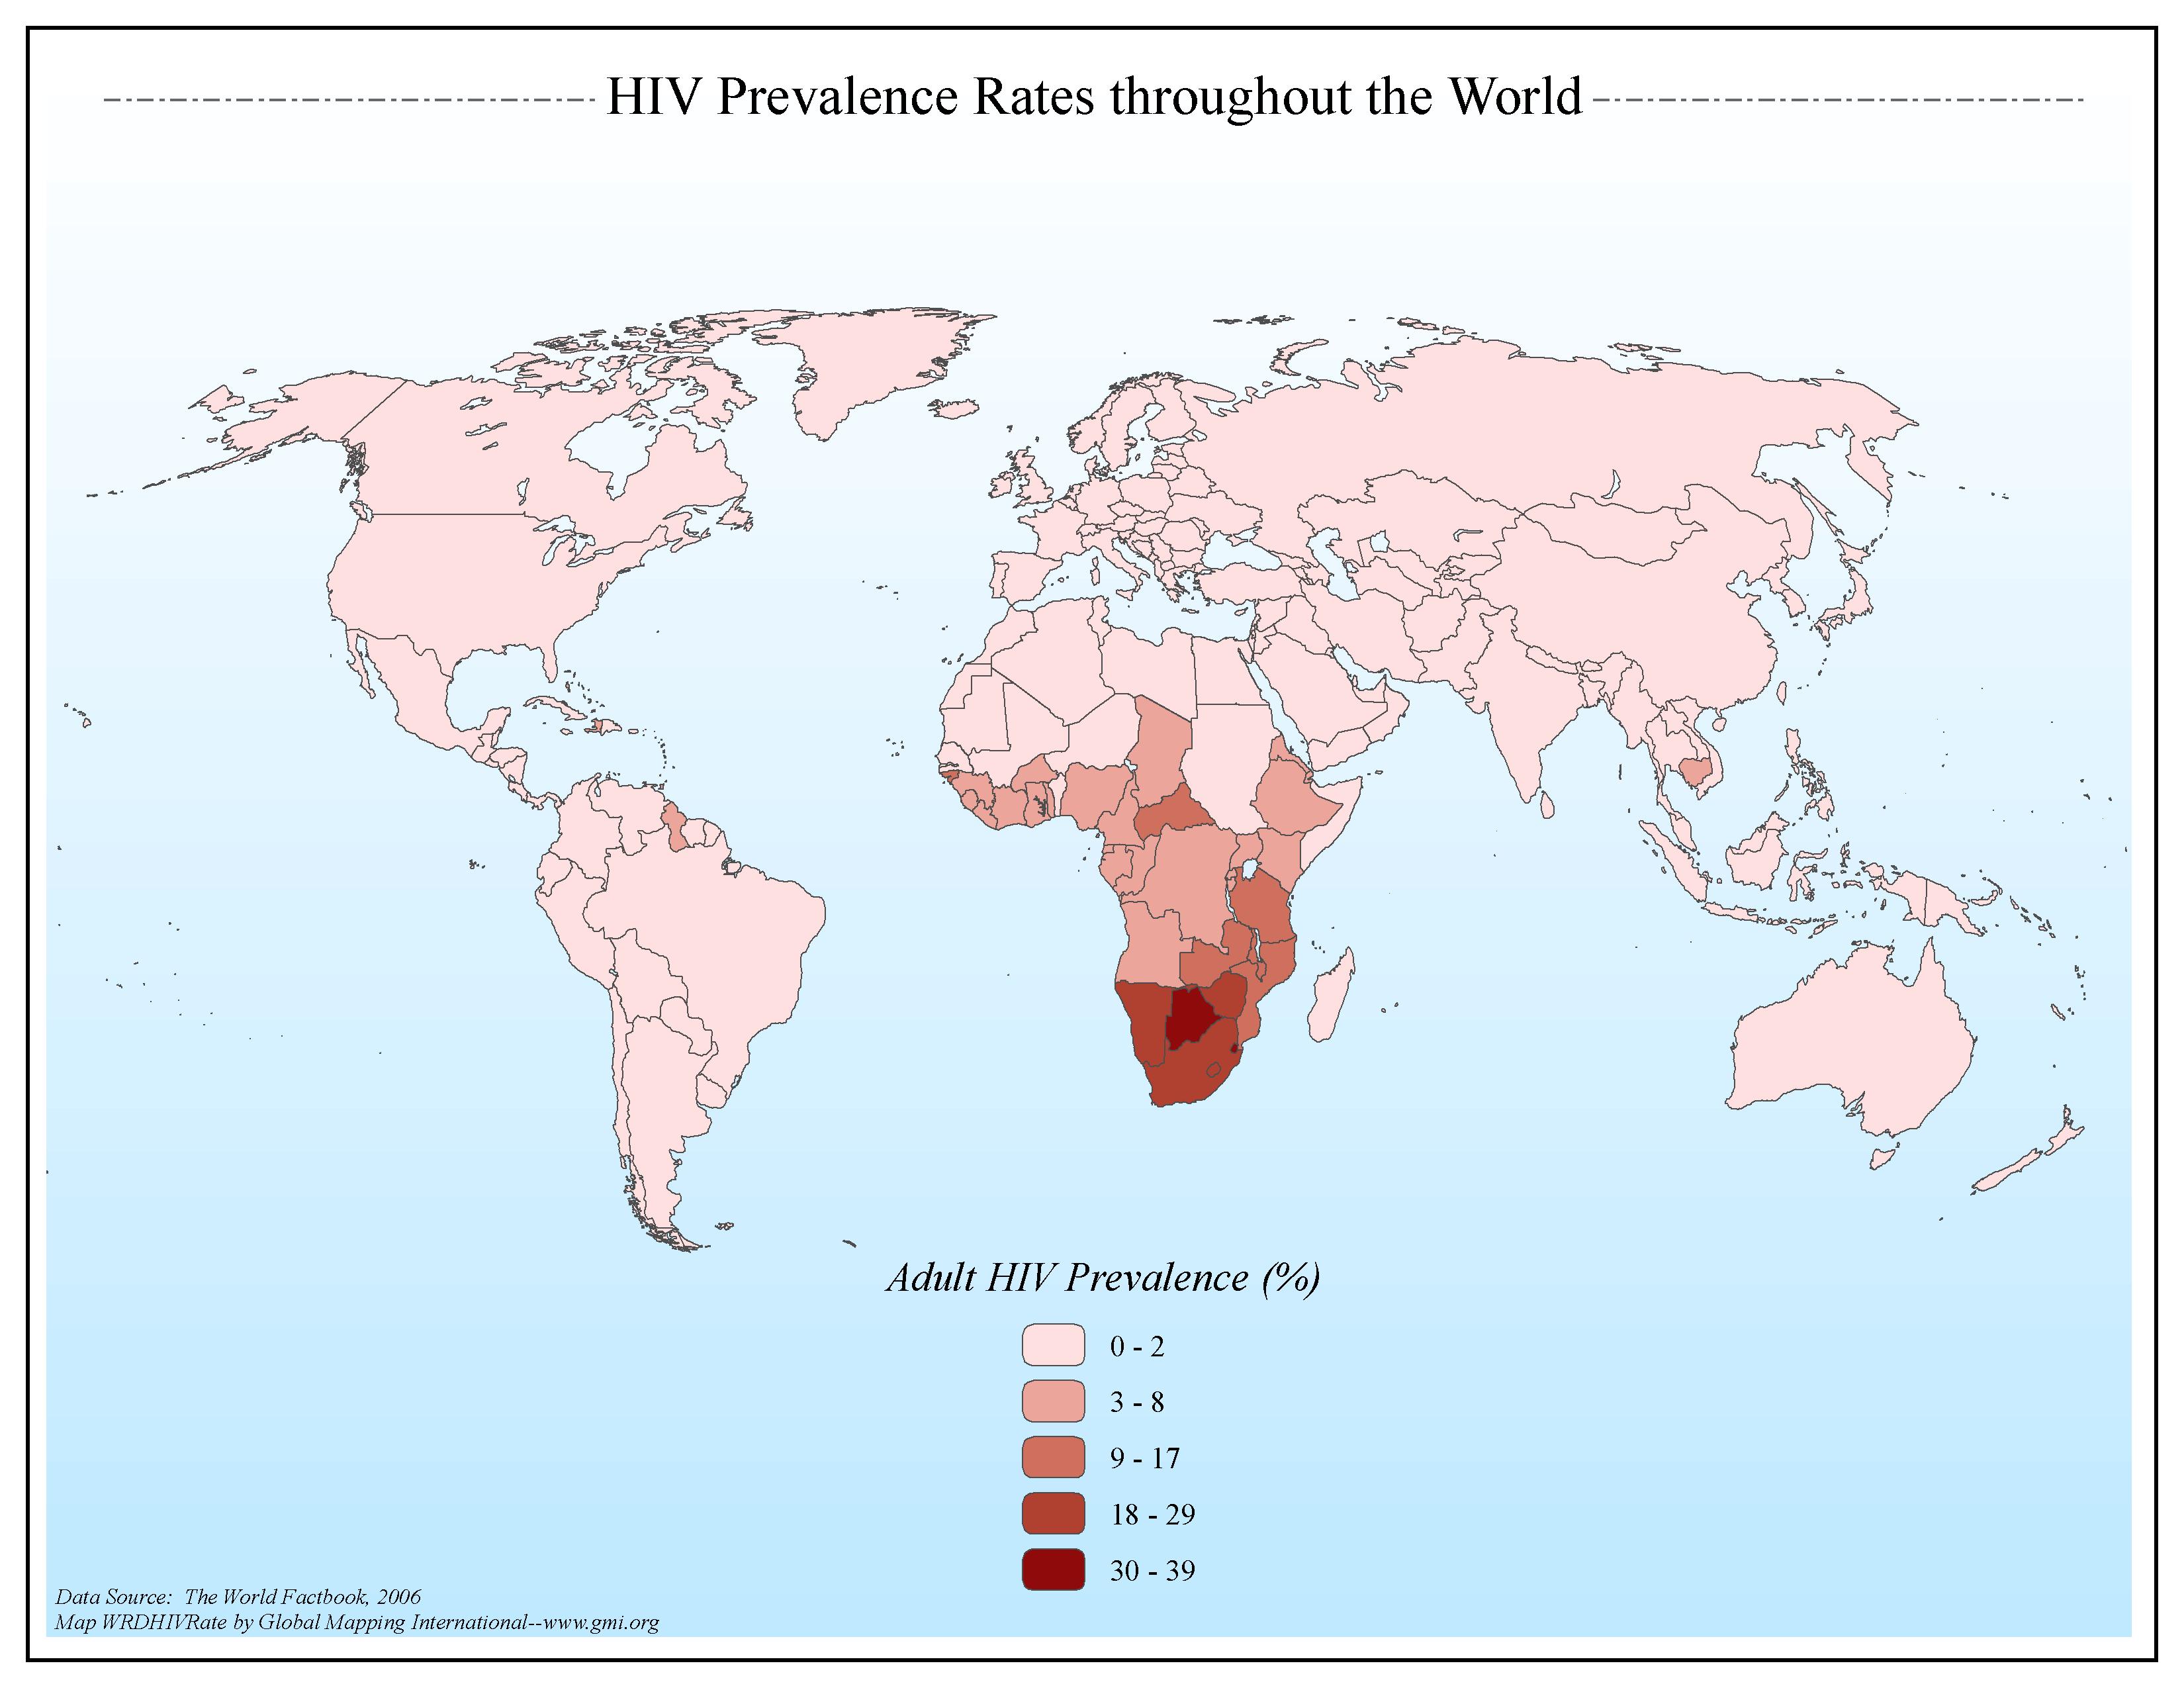 HIV Prevalence Rates throughout the World